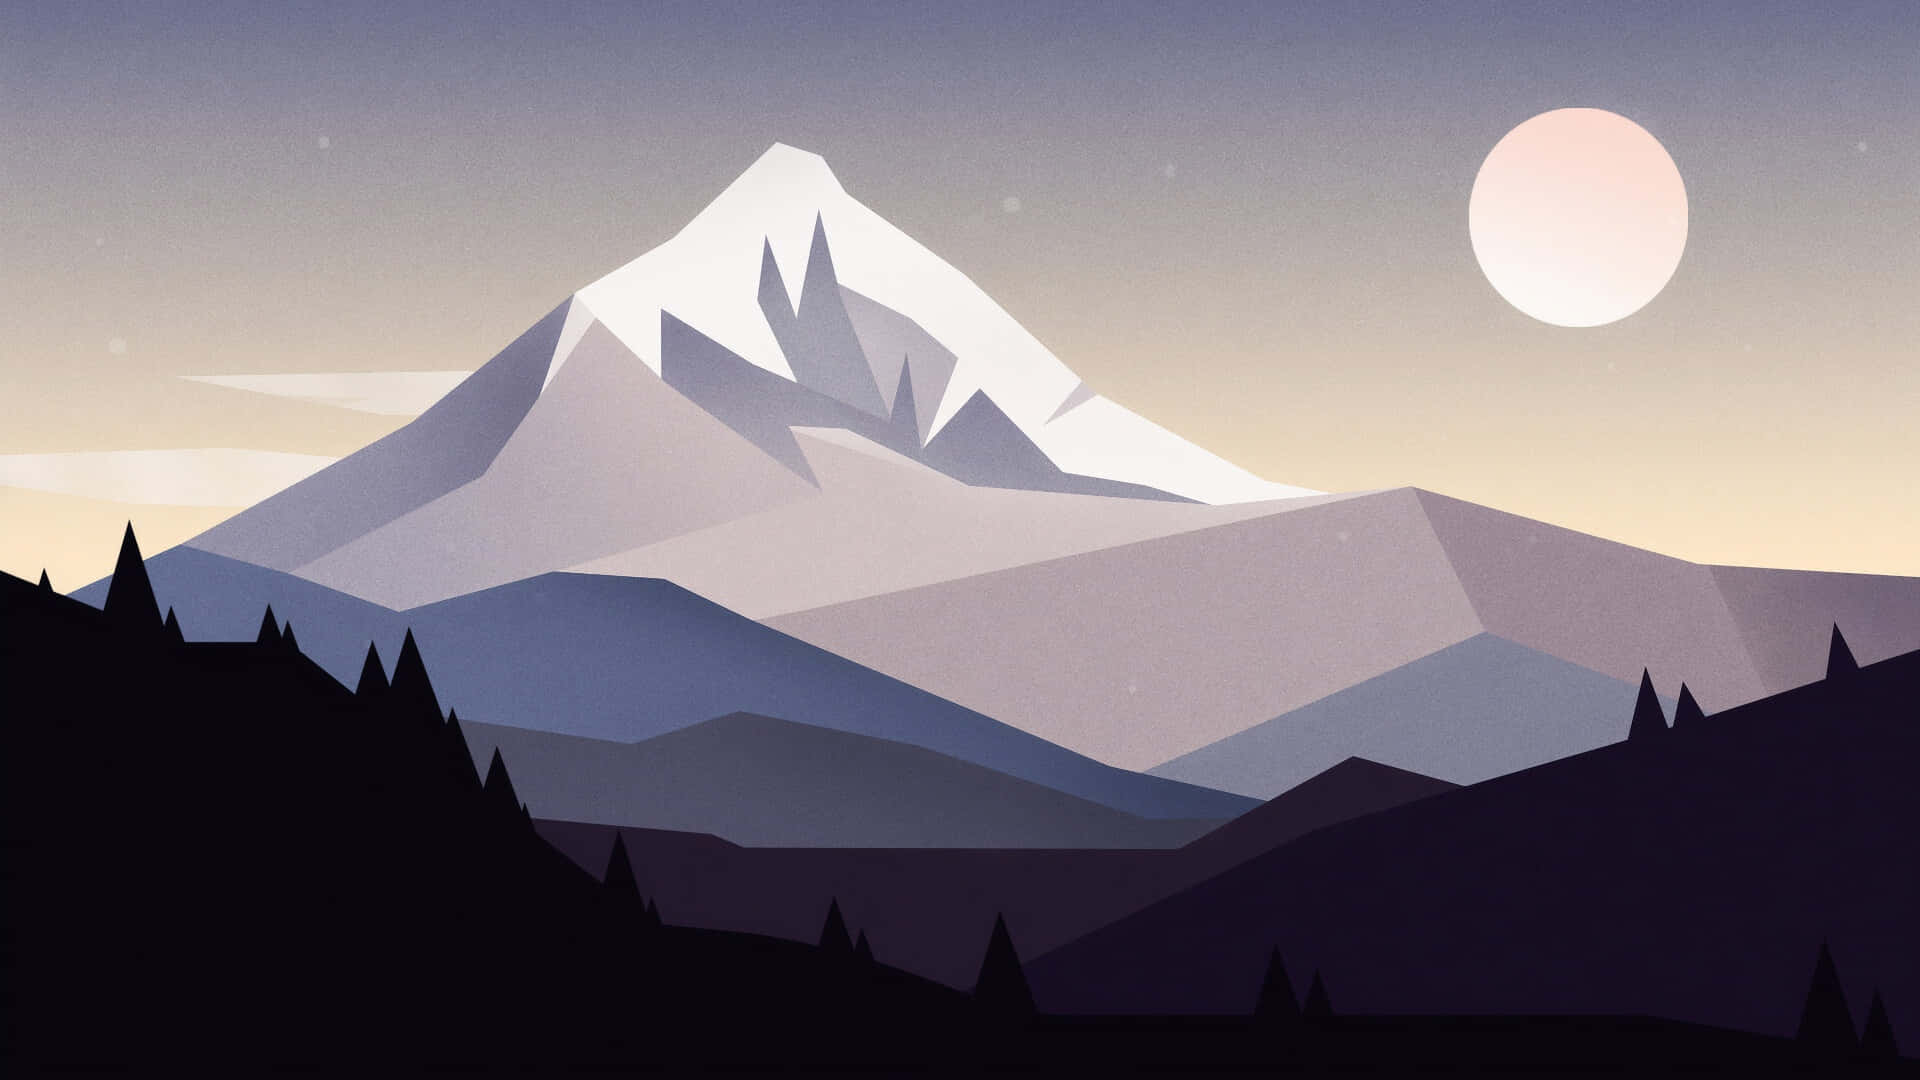 HD wallpaper red and black mountains with white moon illustration  minimalism  Wallpaper Flare